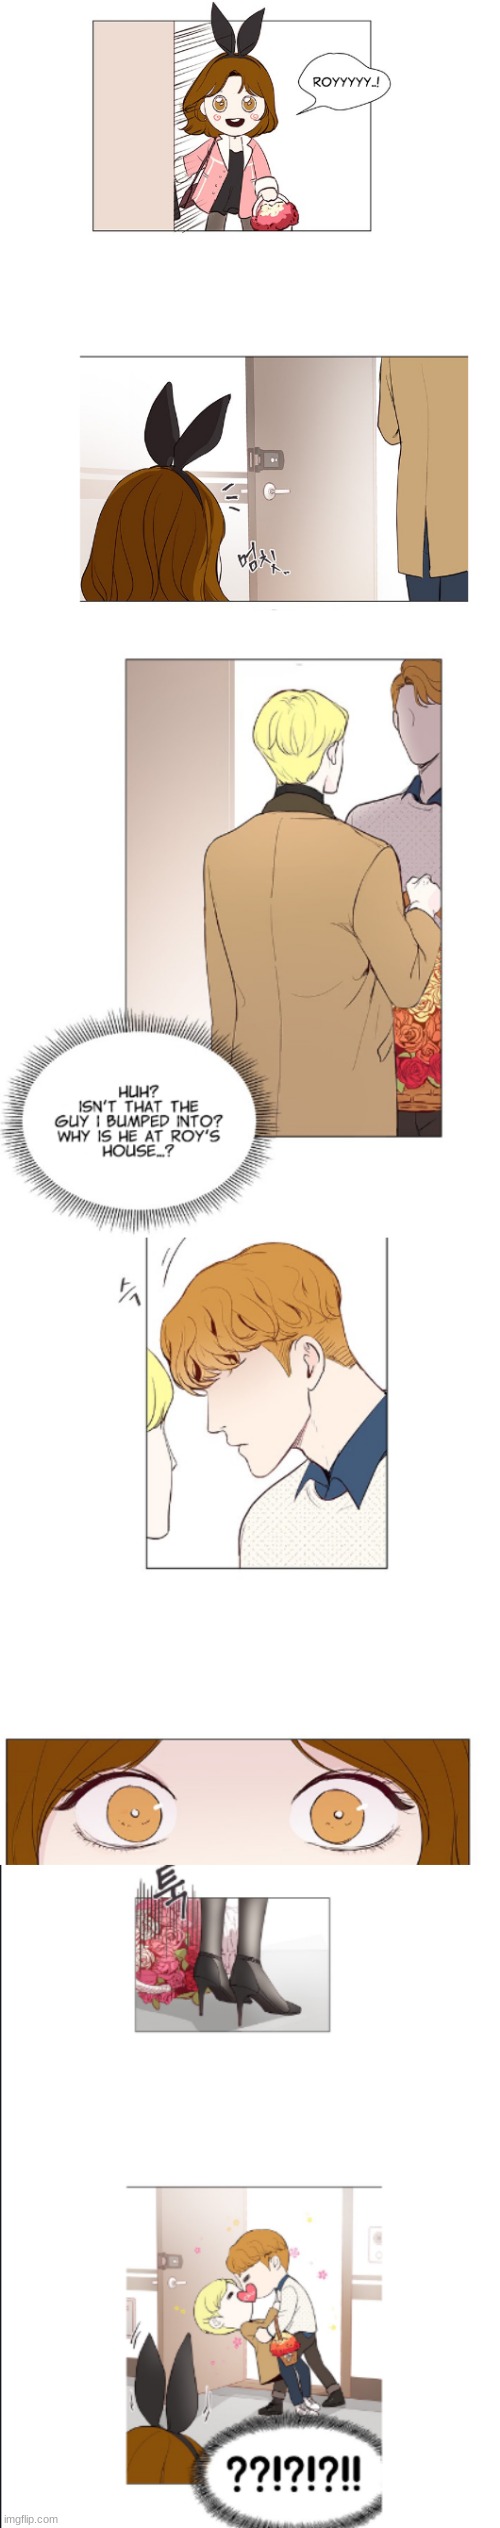 this is a rather surprising way to find out your bf is gay | image tagged in anime,manga,manhwa,funny,lgbtq | made w/ Imgflip meme maker